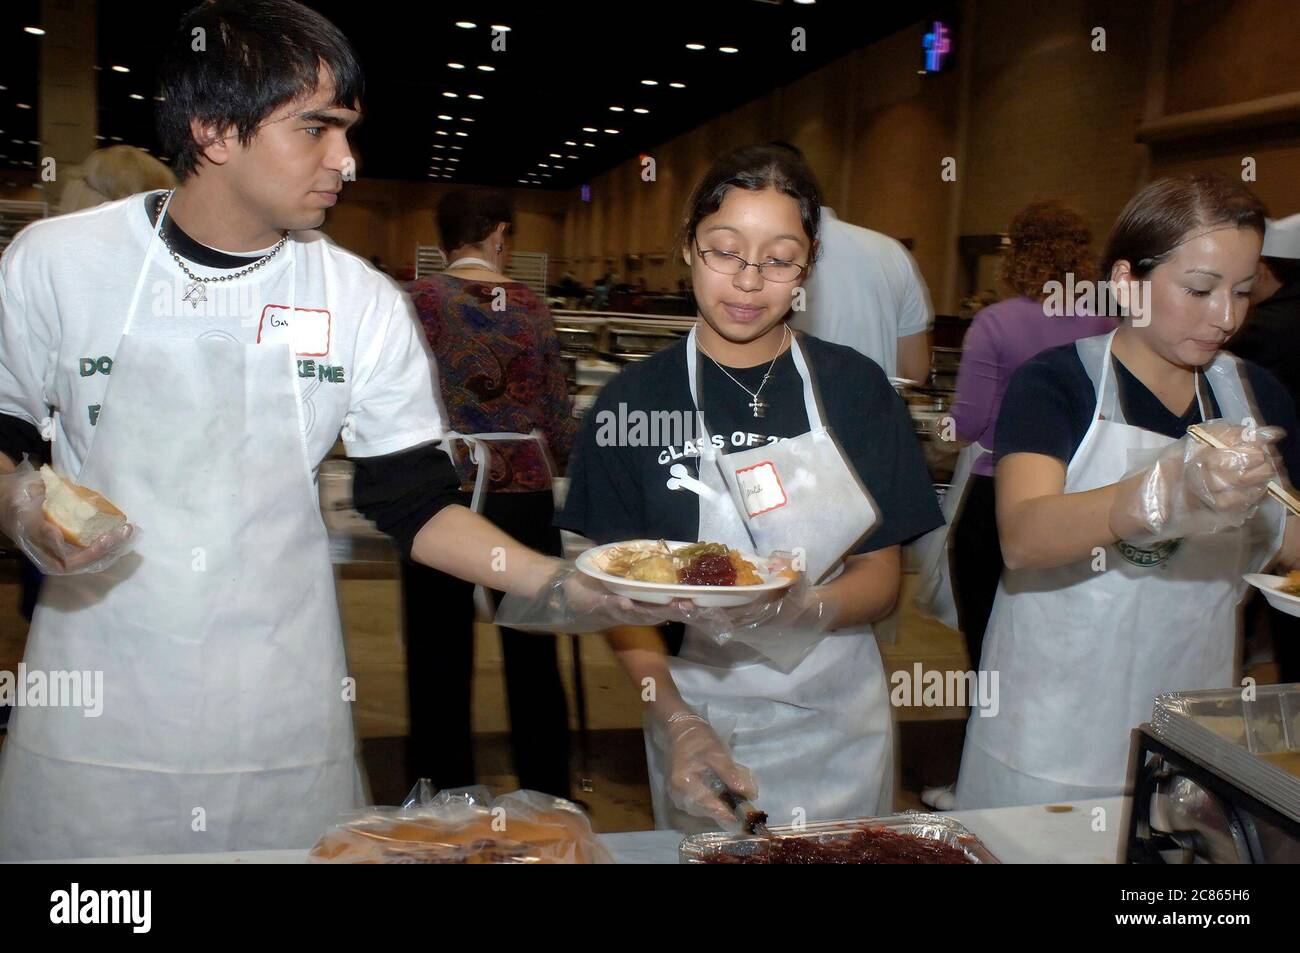 San Antonio, Texas USA, November 24, 2005: Hispanic high school teens put food on plates at the annual Raul Jiminez Thanksgiving Dinner, where more than 25,000 meals on Thanksgiving Day are served for the elderly, homeless, poor and displaced of south Texas. The event, created by the late restauranteur Raul Jiminez, is in its 26th year.   ©Bob Daemmrich Stock Photo